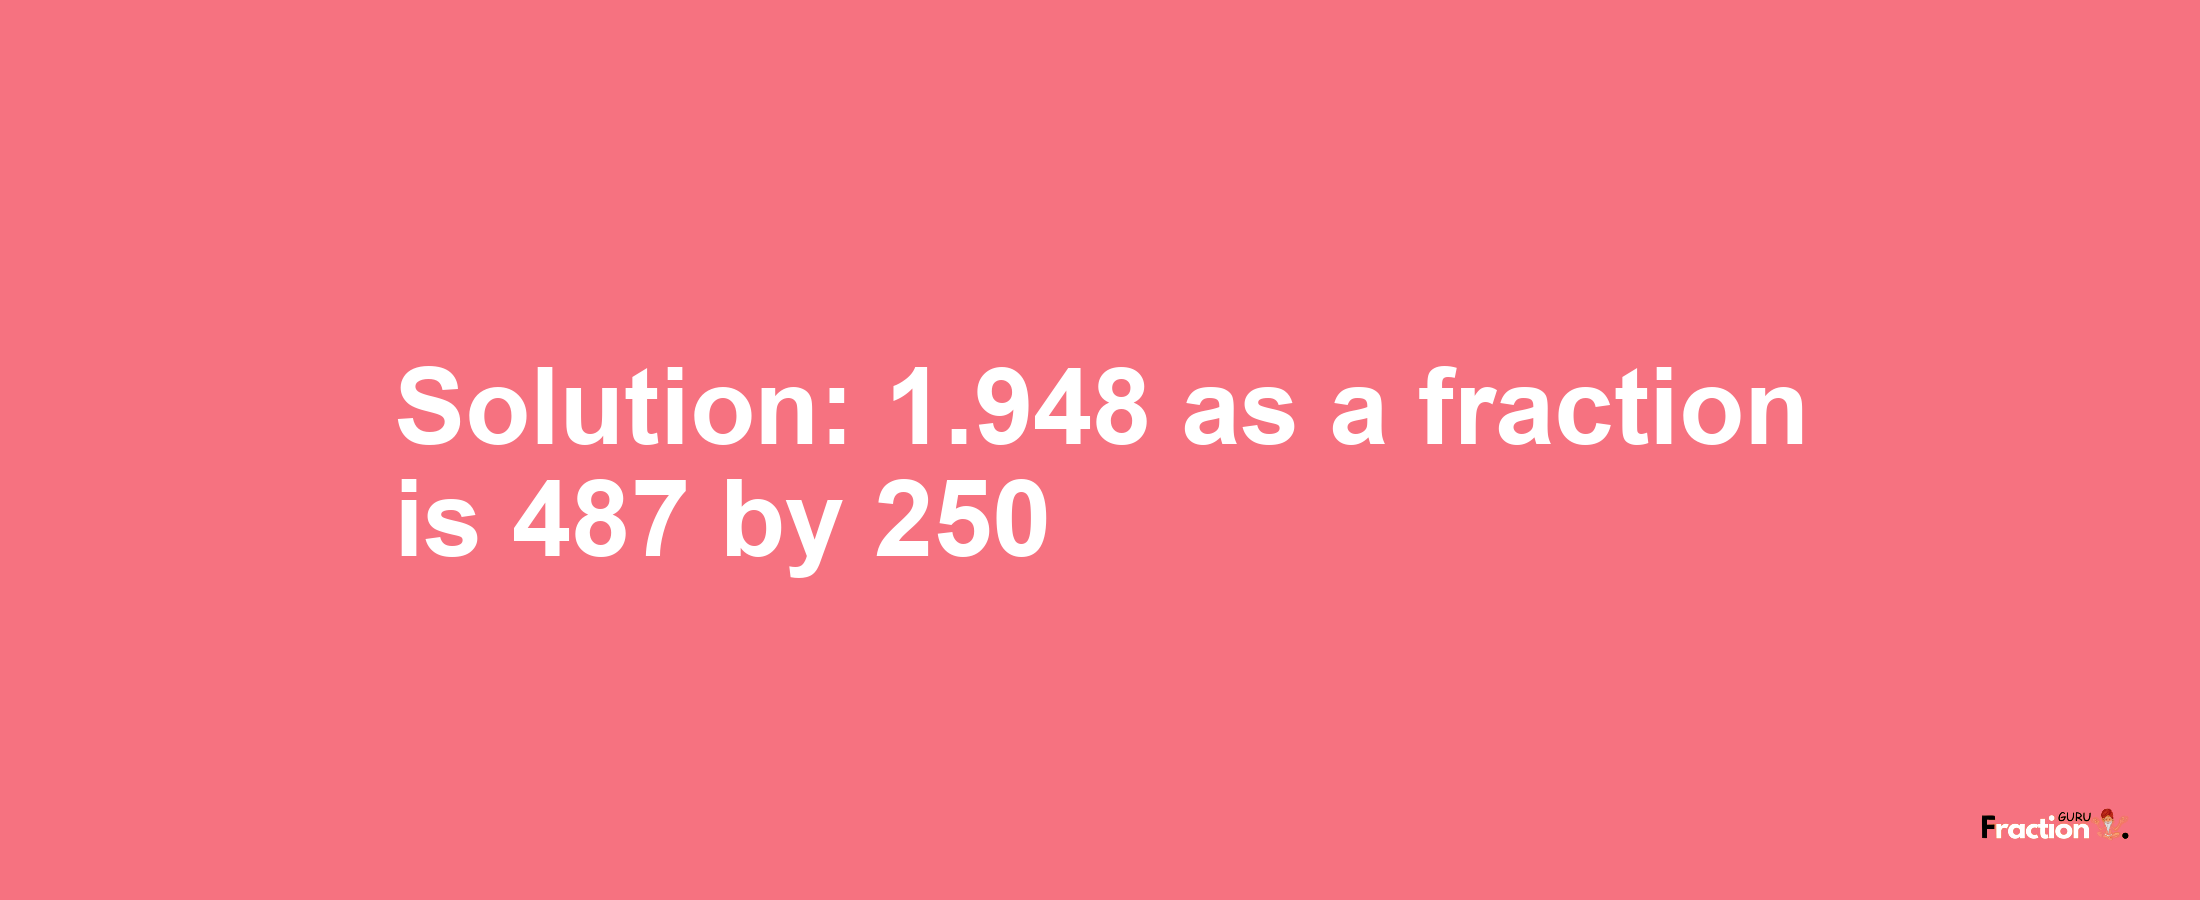 Solution:1.948 as a fraction is 487/250